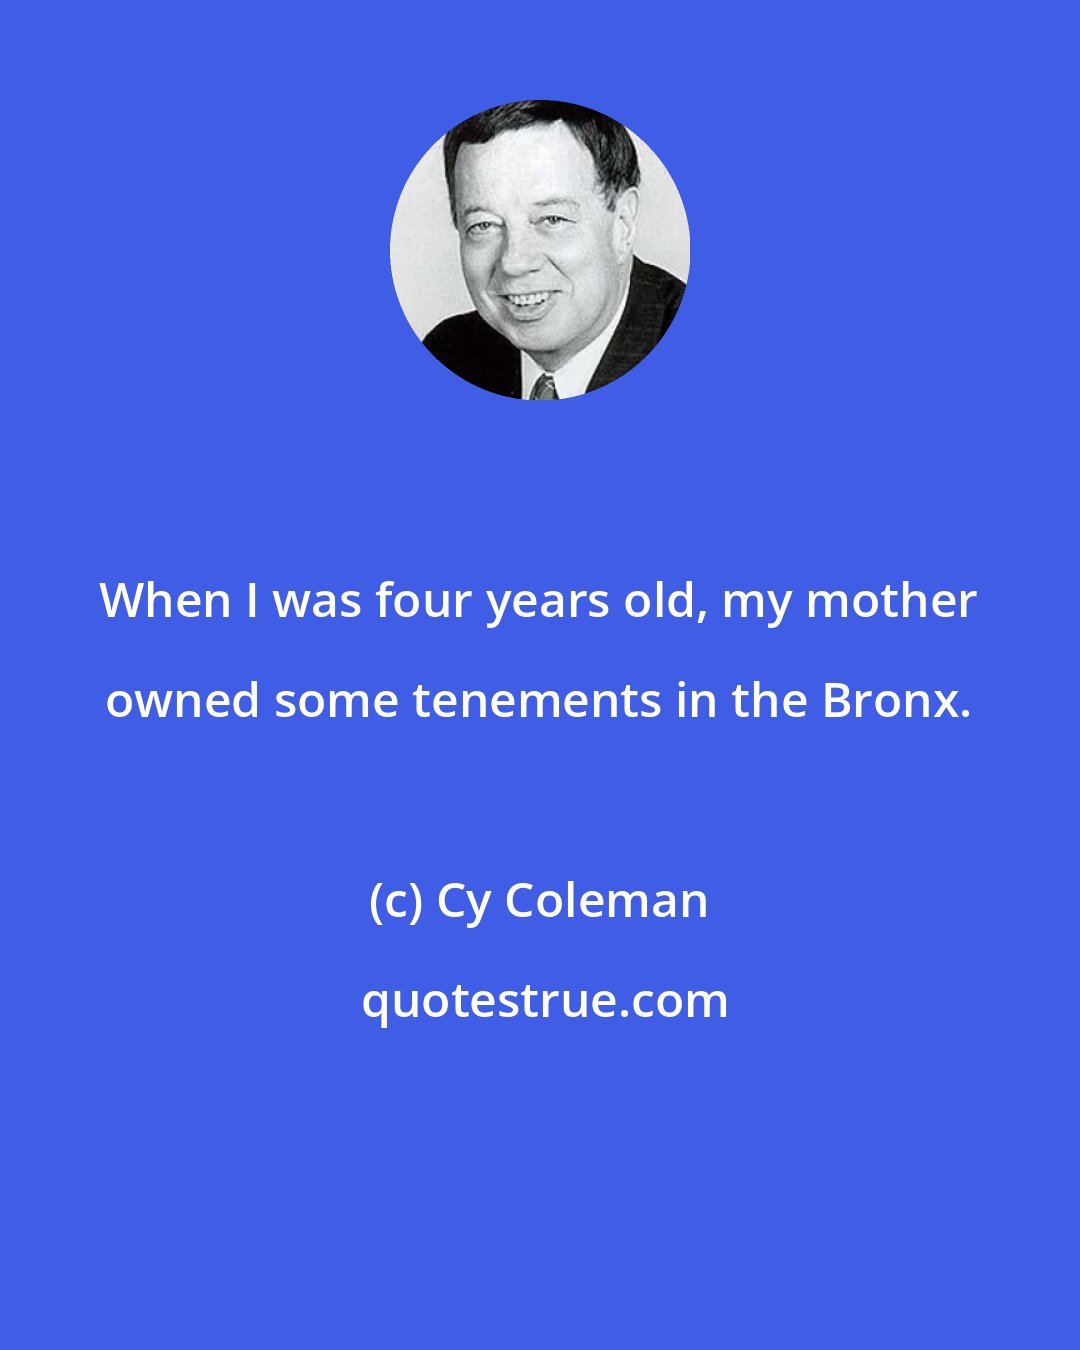 Cy Coleman: When I was four years old, my mother owned some tenements in the Bronx.